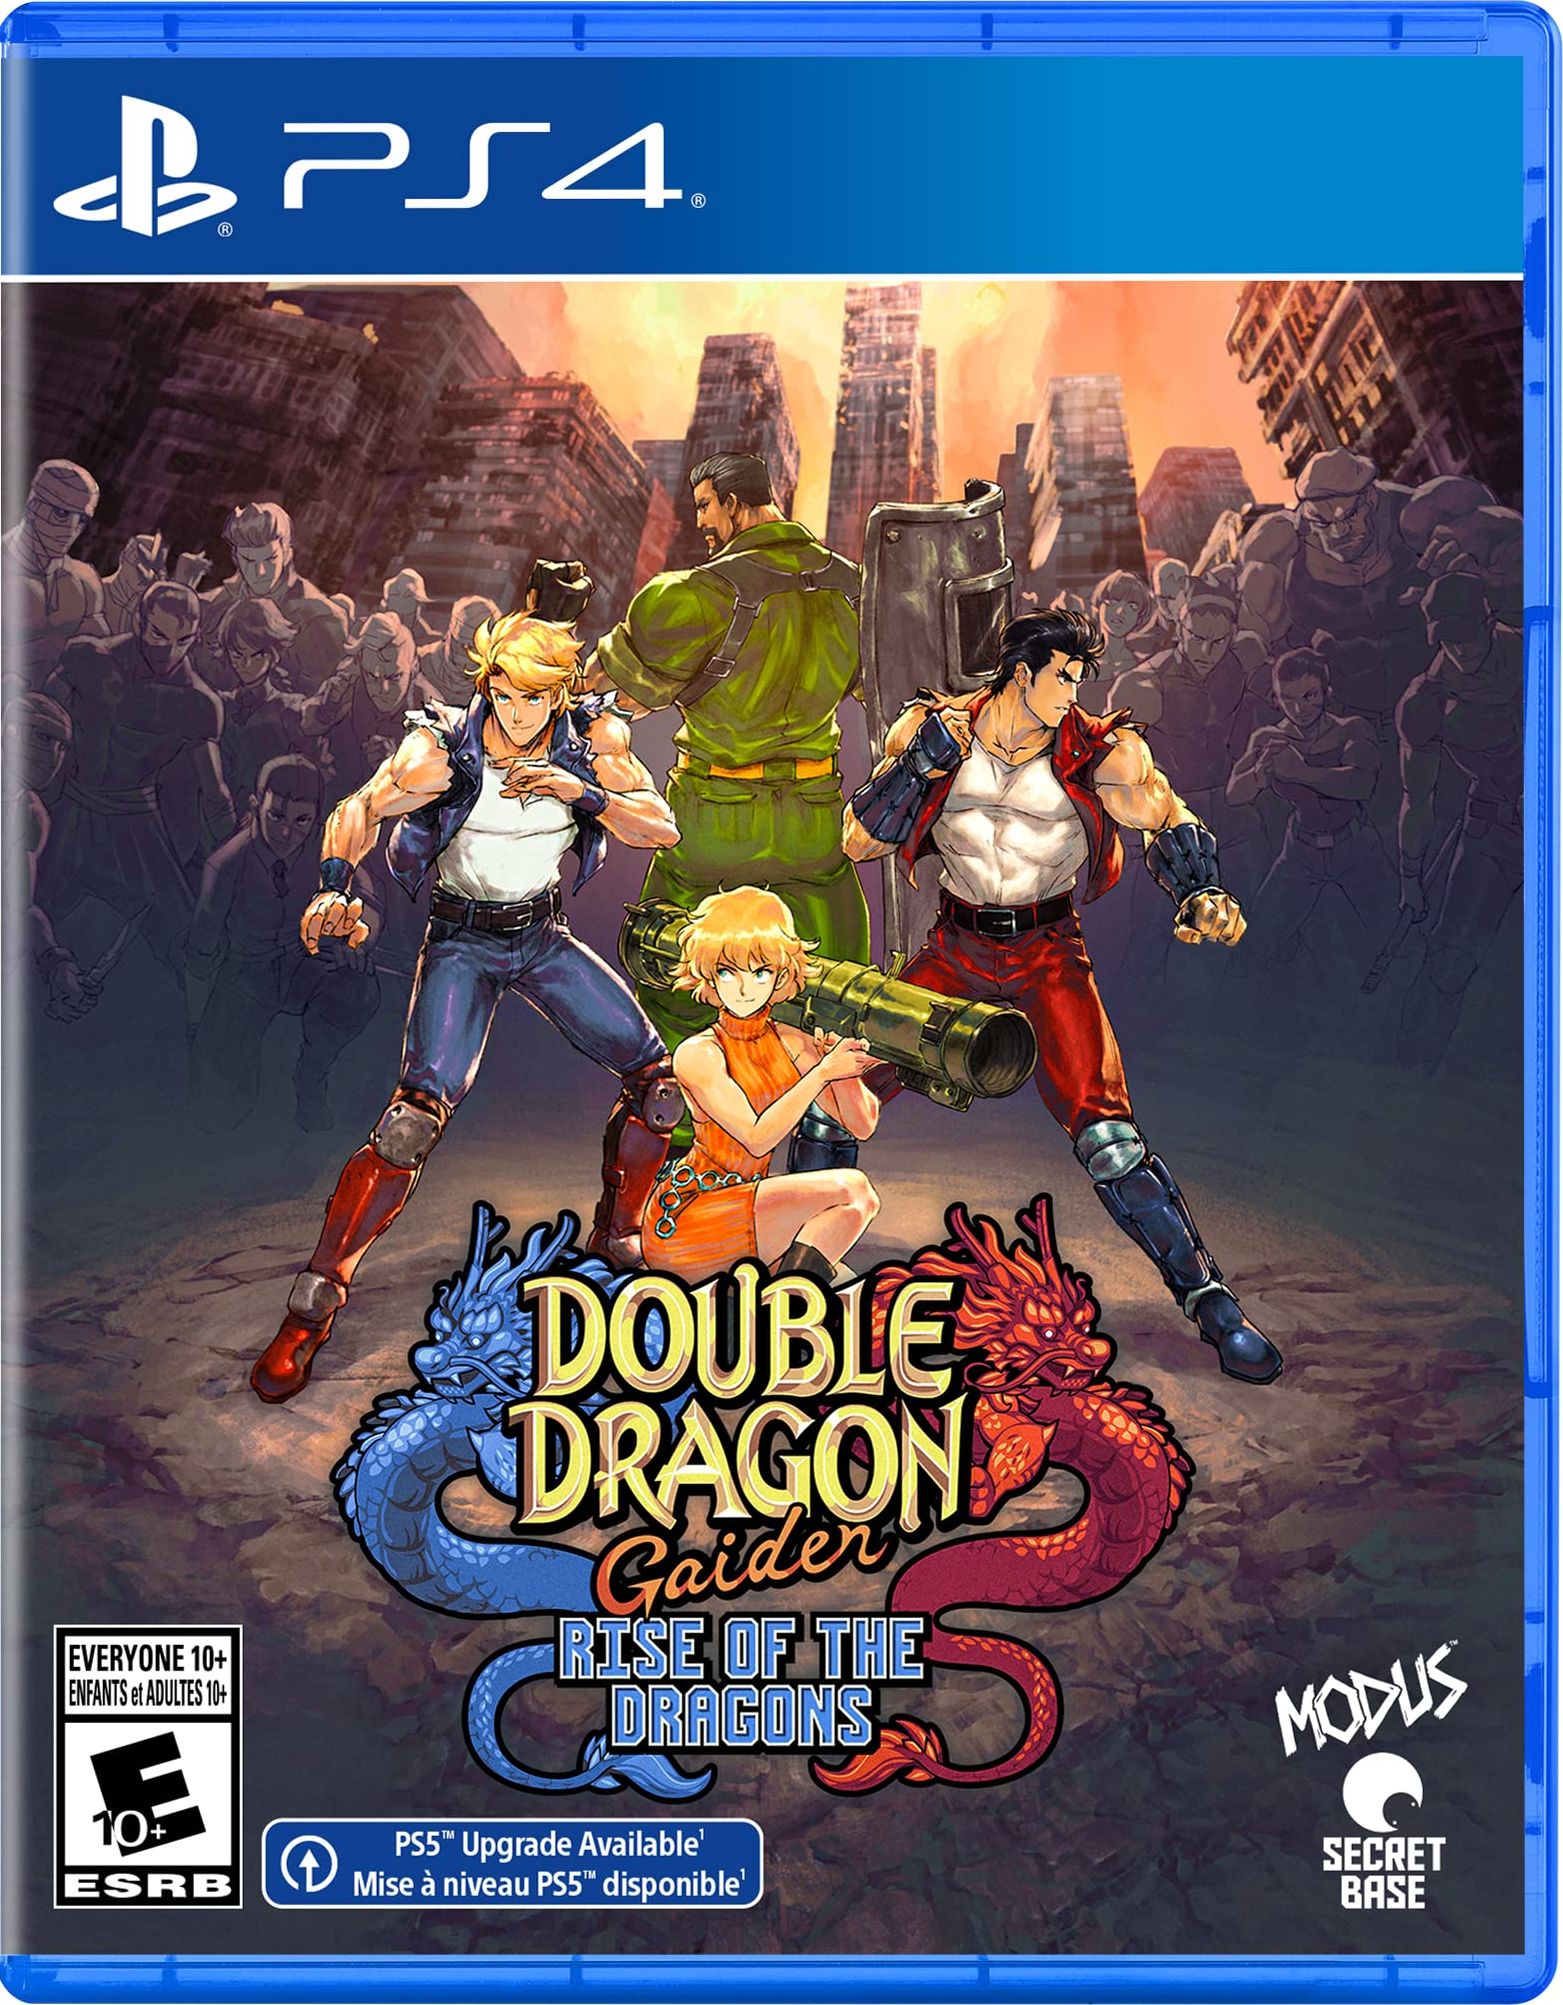 Double Dragon Gaiden: Rise of the Dragons release date set for